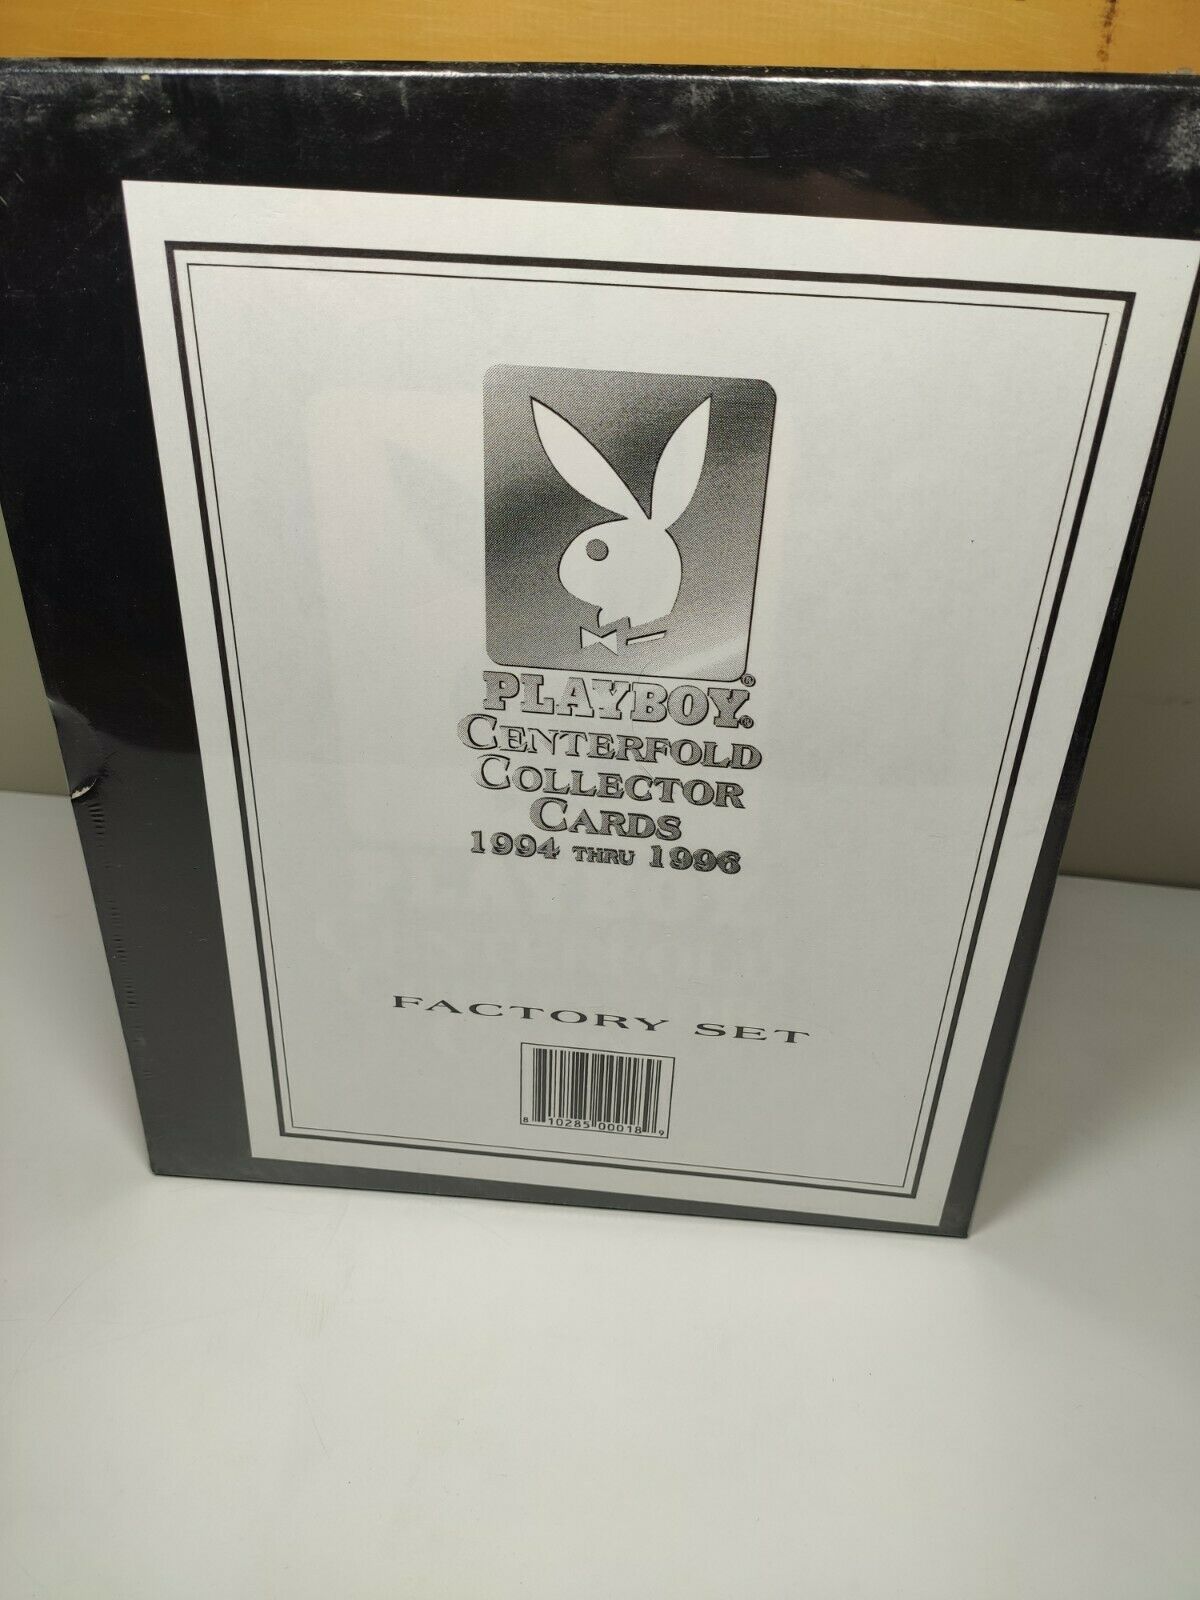 Playboy Centerfold Collector Cards 1994 Thru 1996 Edition Sealed